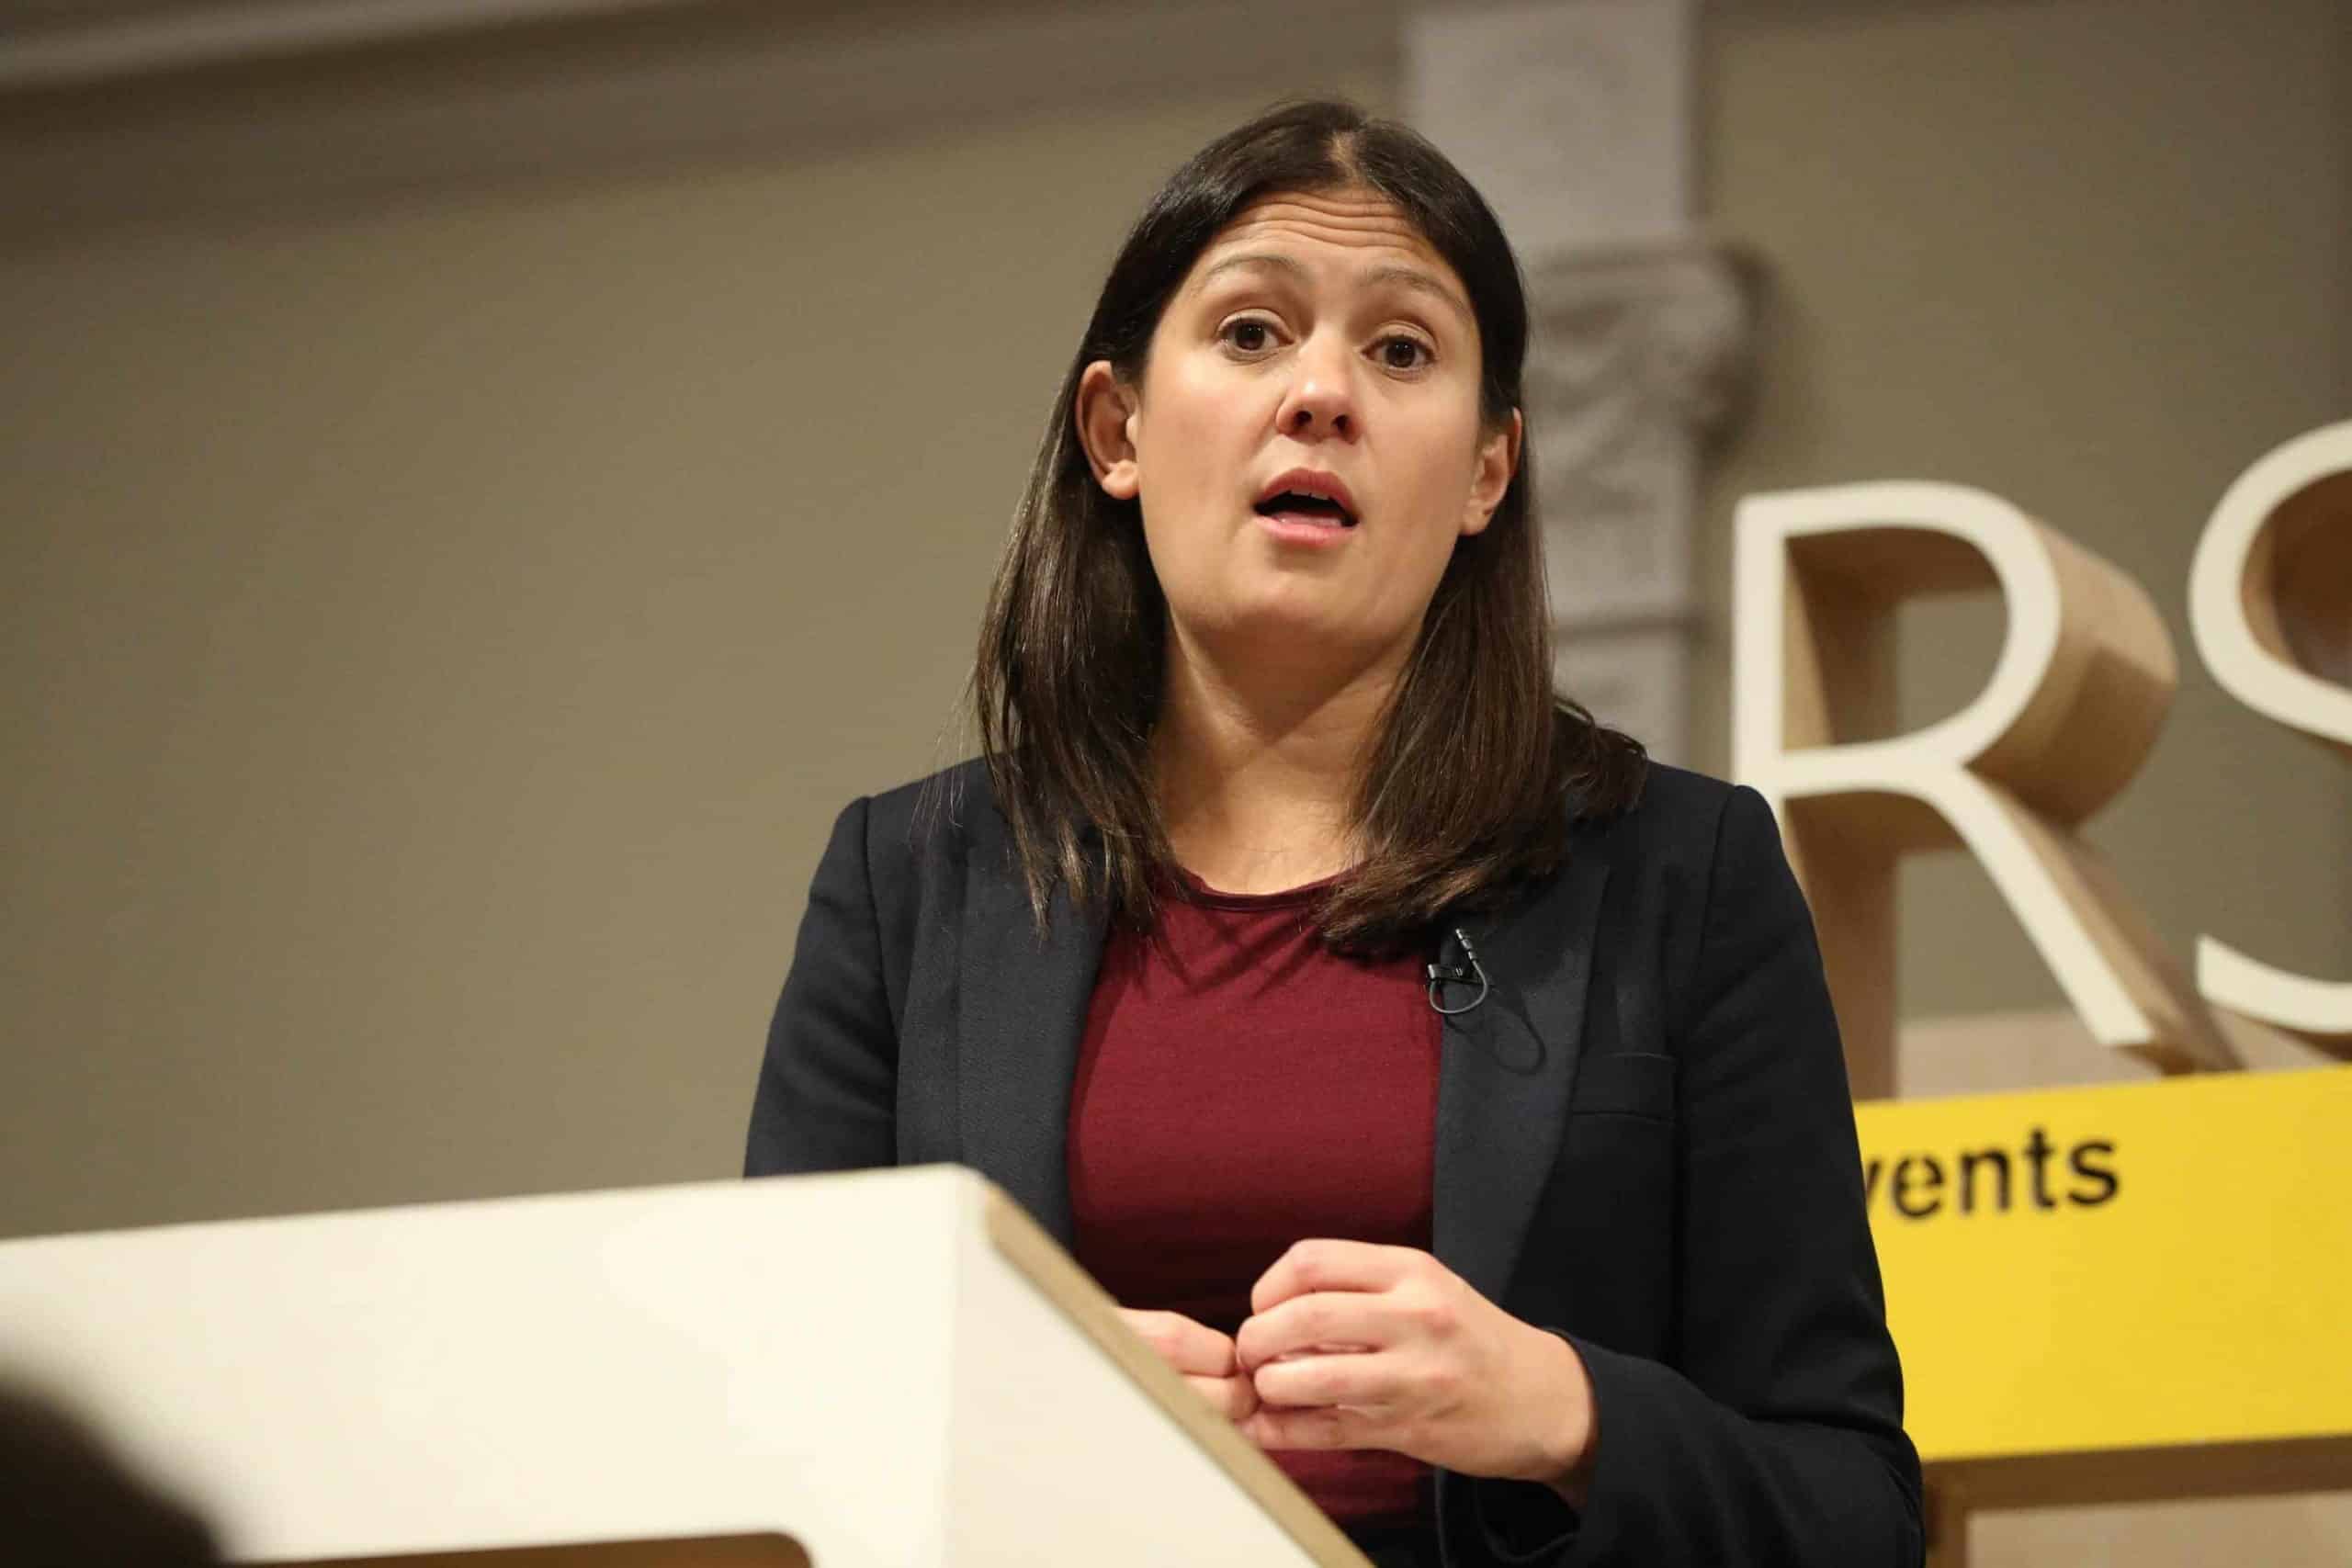 6 things we learnt about Lisa Nandy’s vision for Britain